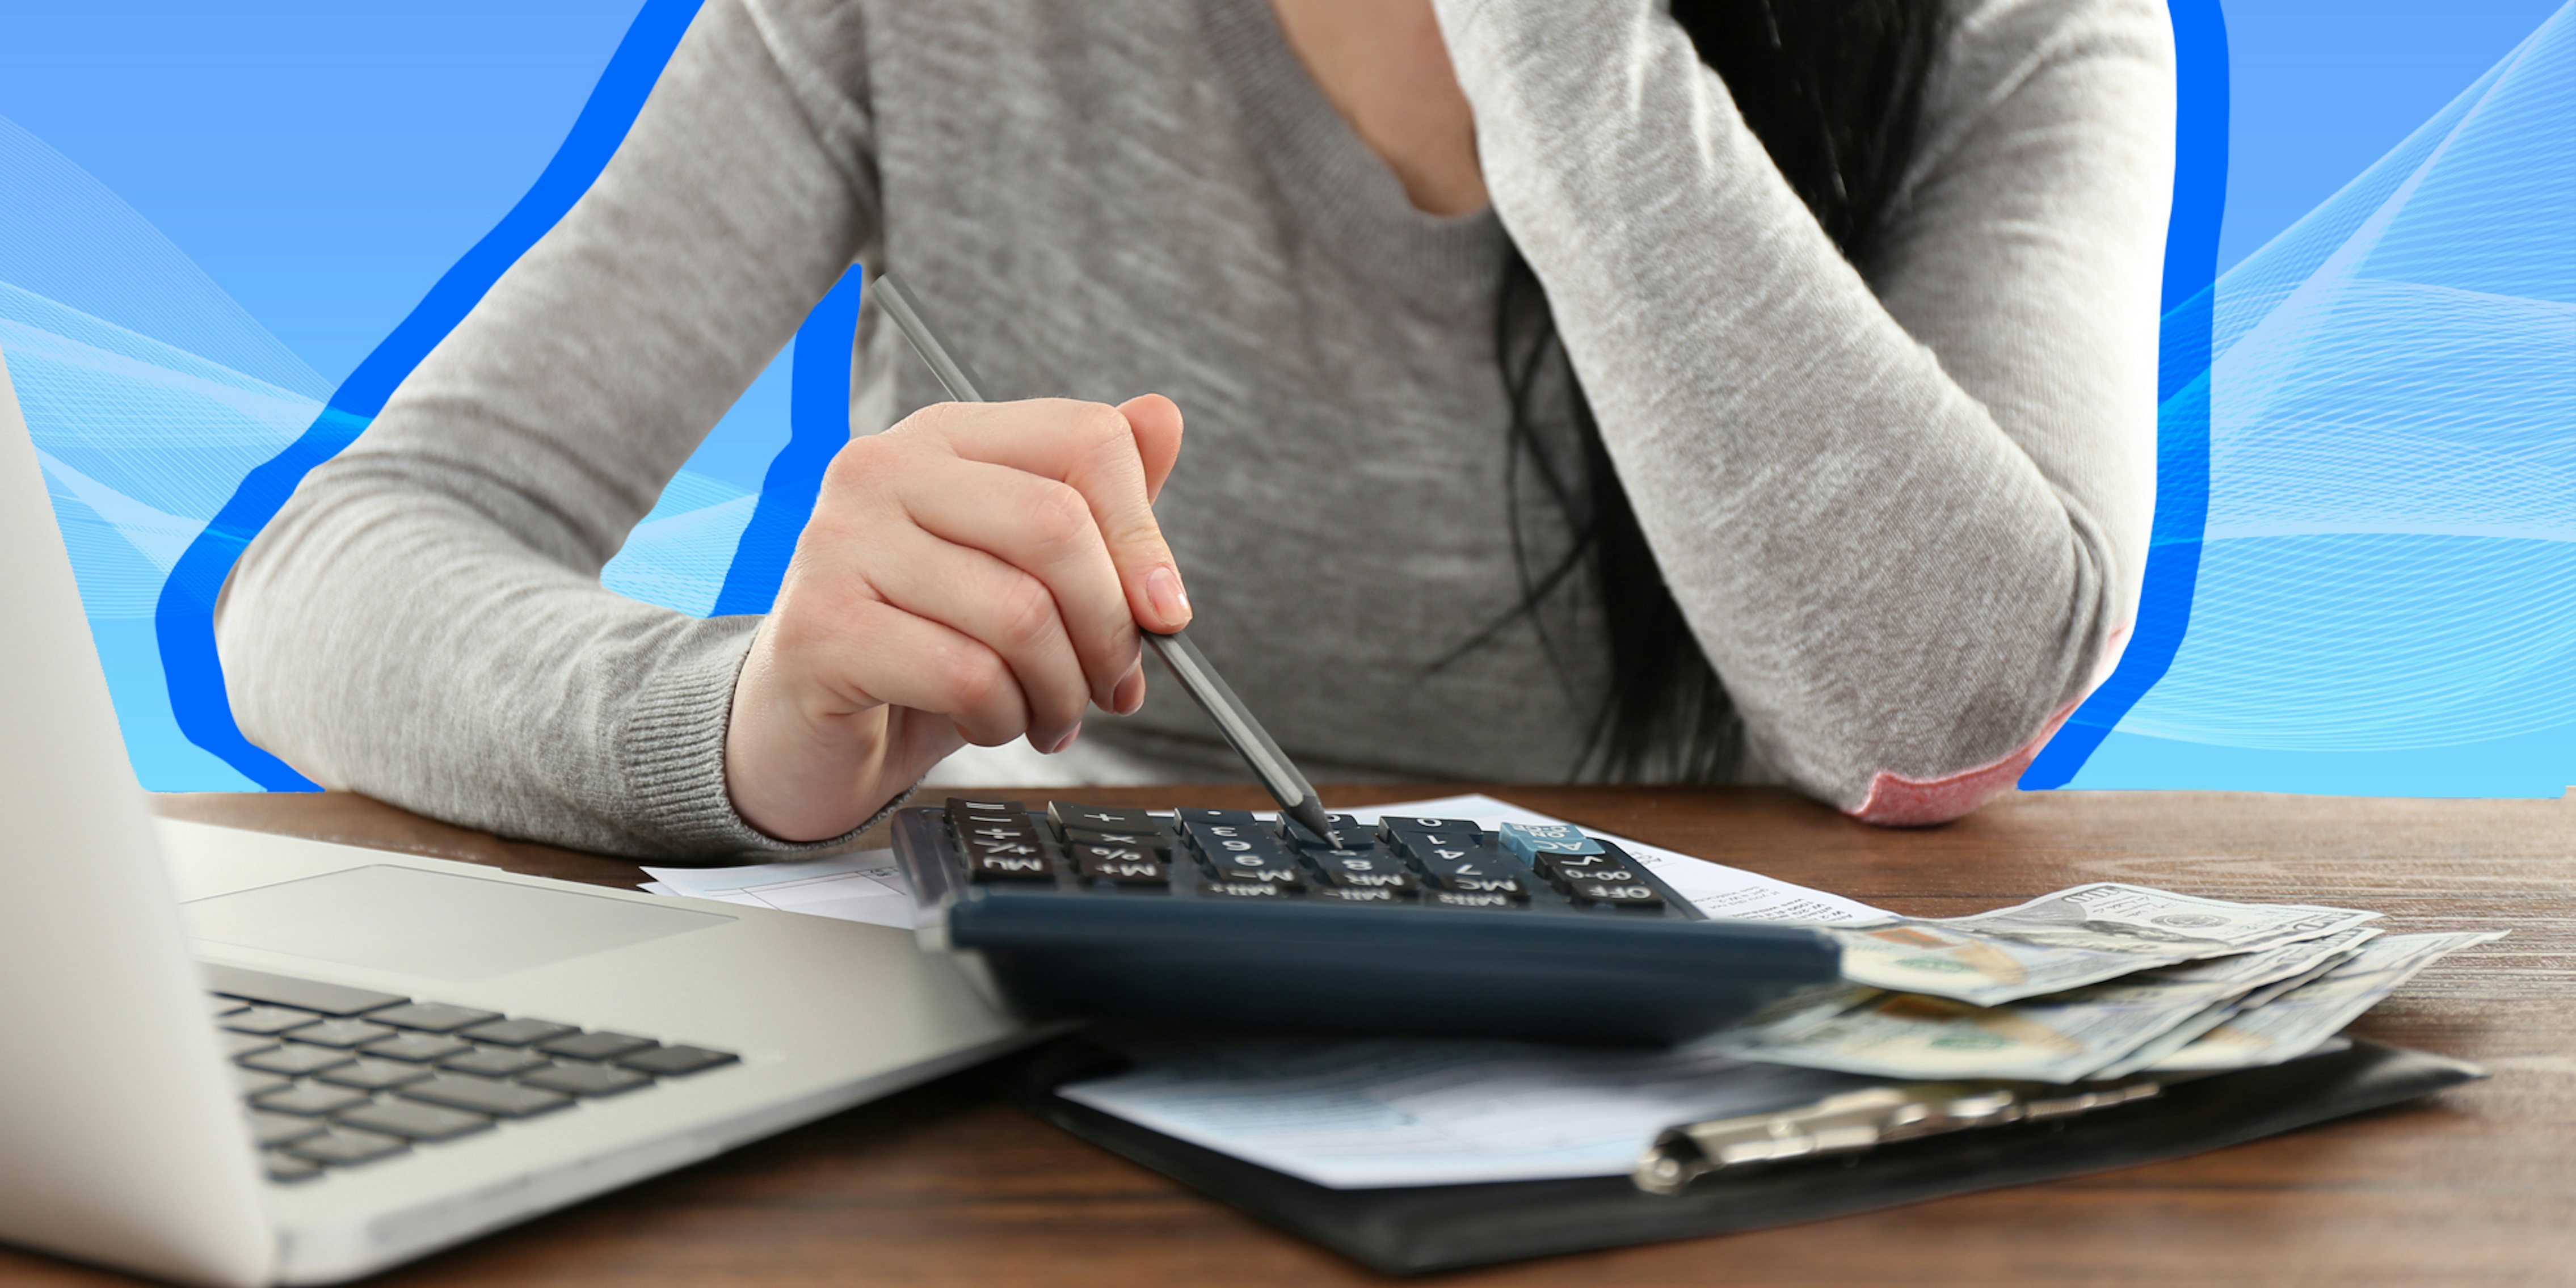 woman using calculator on desk with forms laptop and cash in front of blue background passionfruit remix